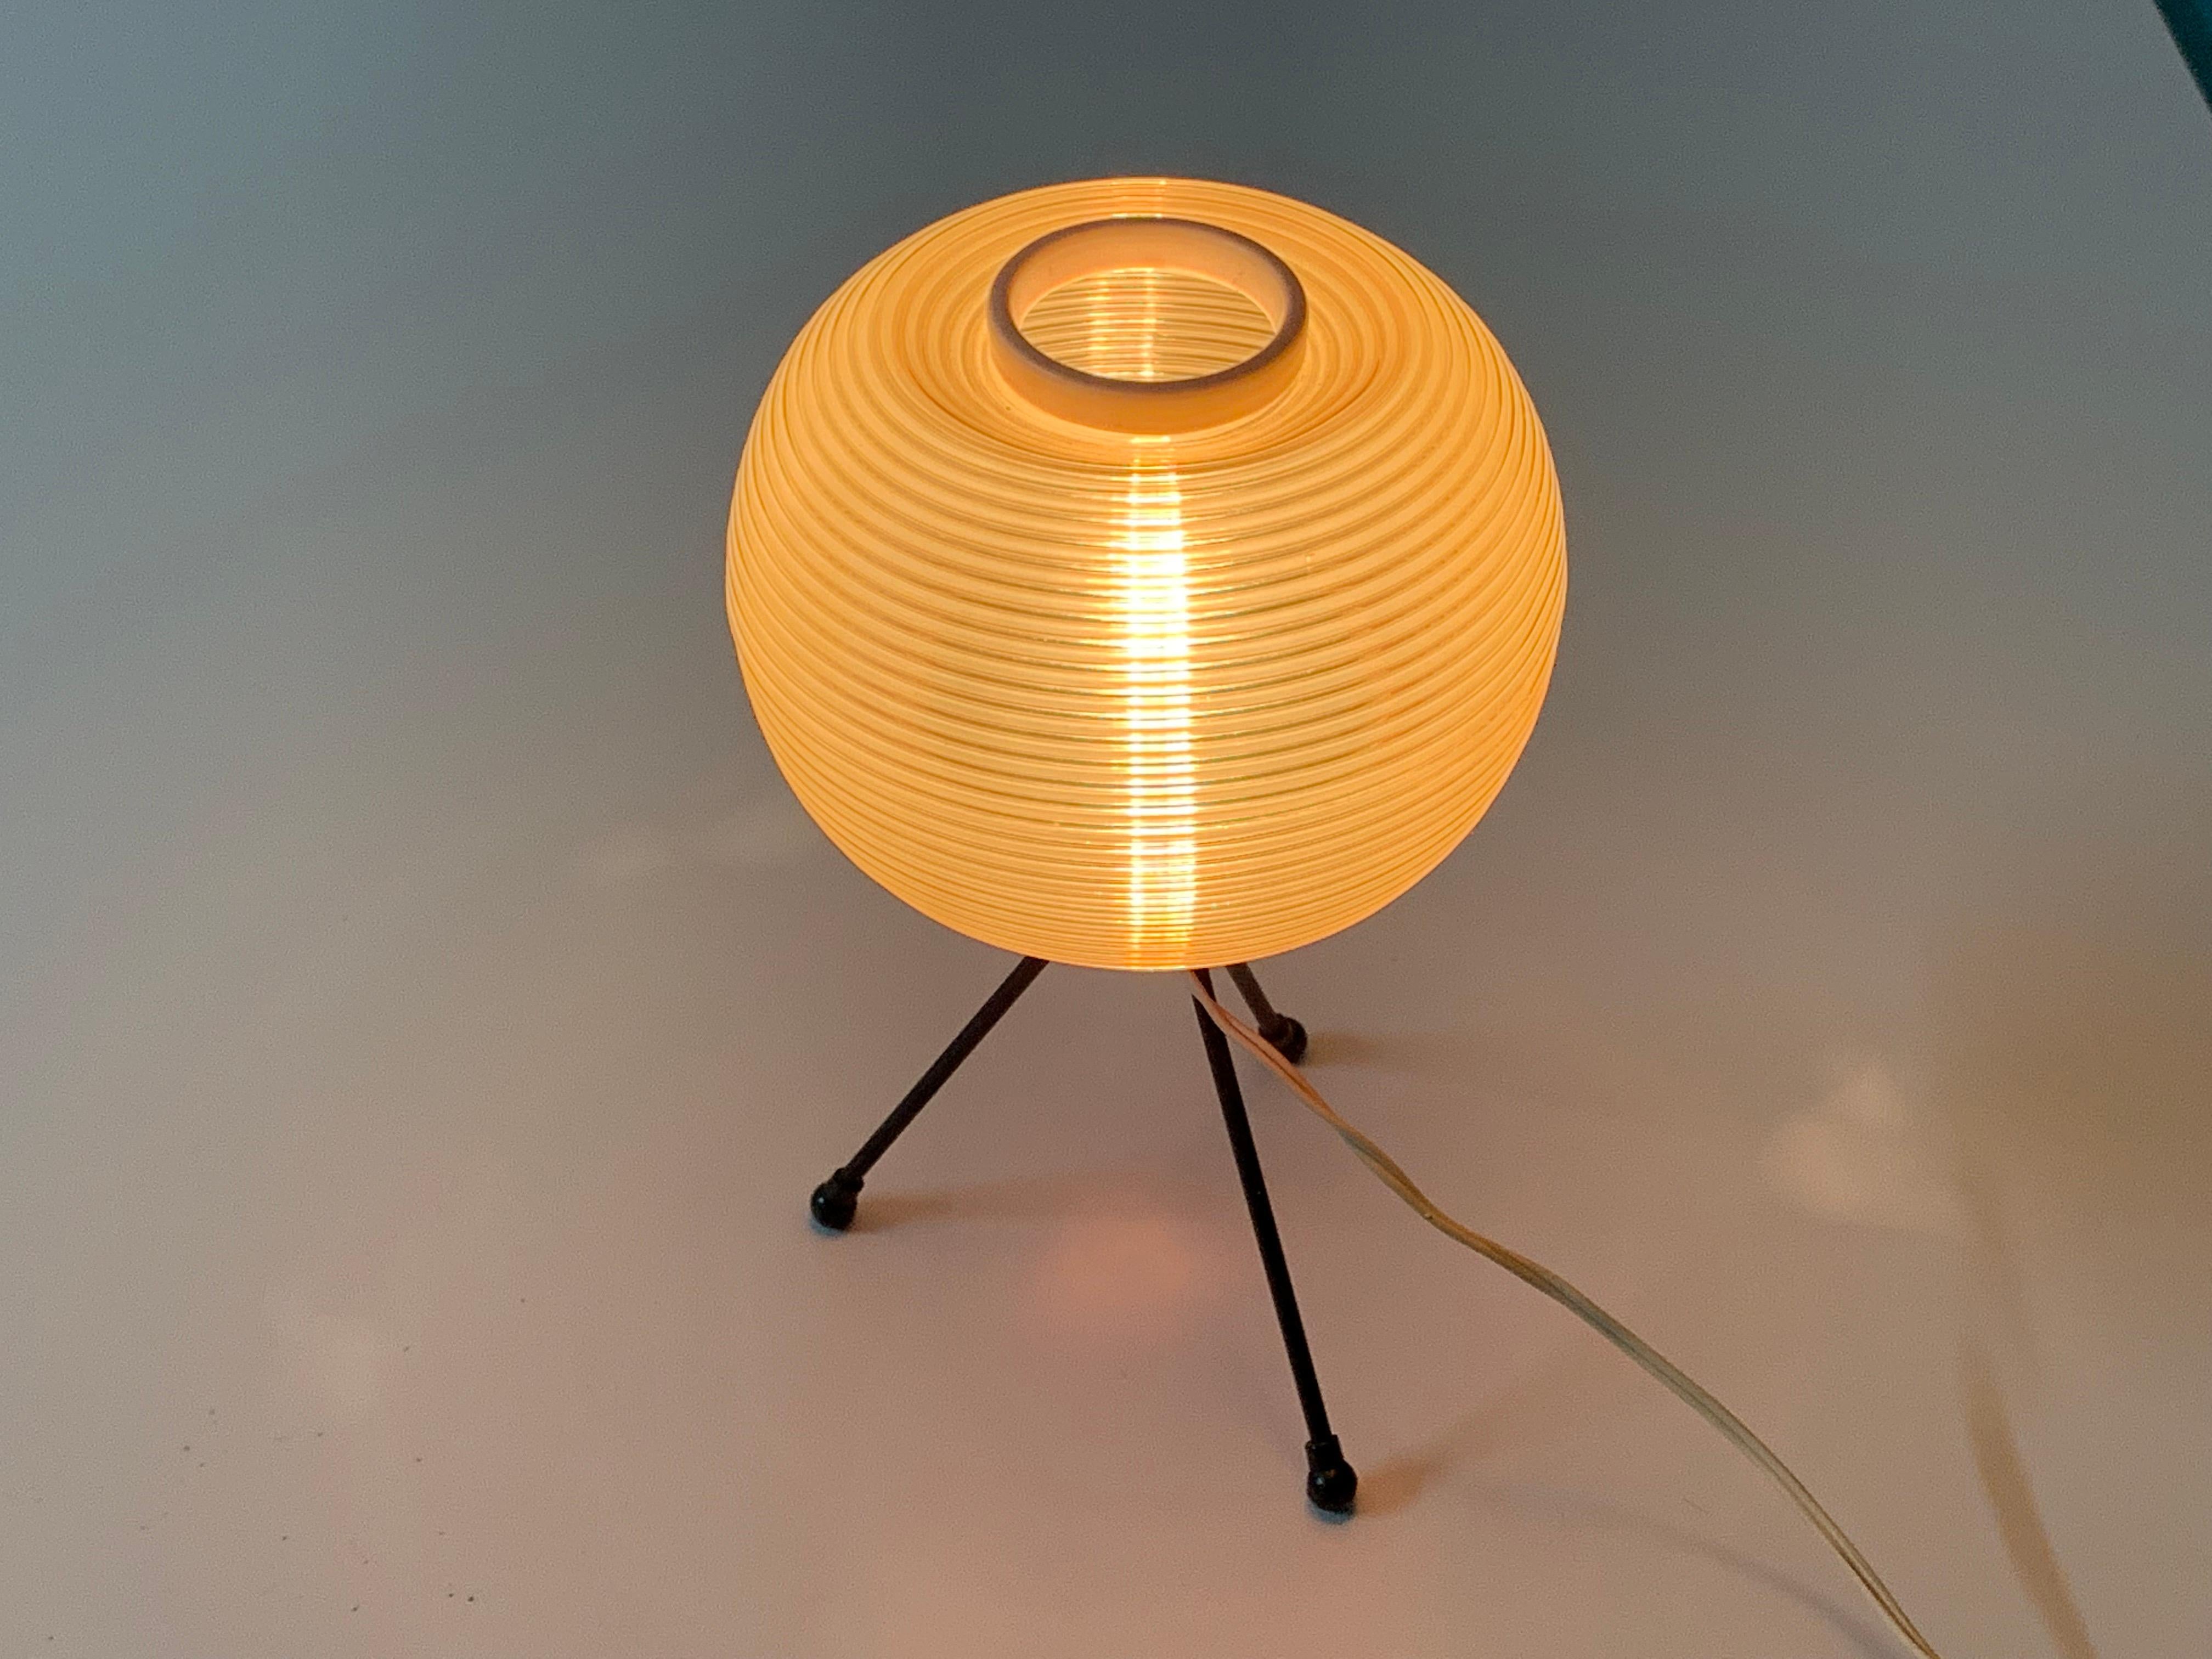 Amazing table lamp with very rare French design from the 1950s. It was designed by Pierre Guariche (1926-1995) and by Joseph-André Motte (1925-2013), with Disderot as editor and produced by Heifetz Rotaflex.

This midcentury lamp has a black metal